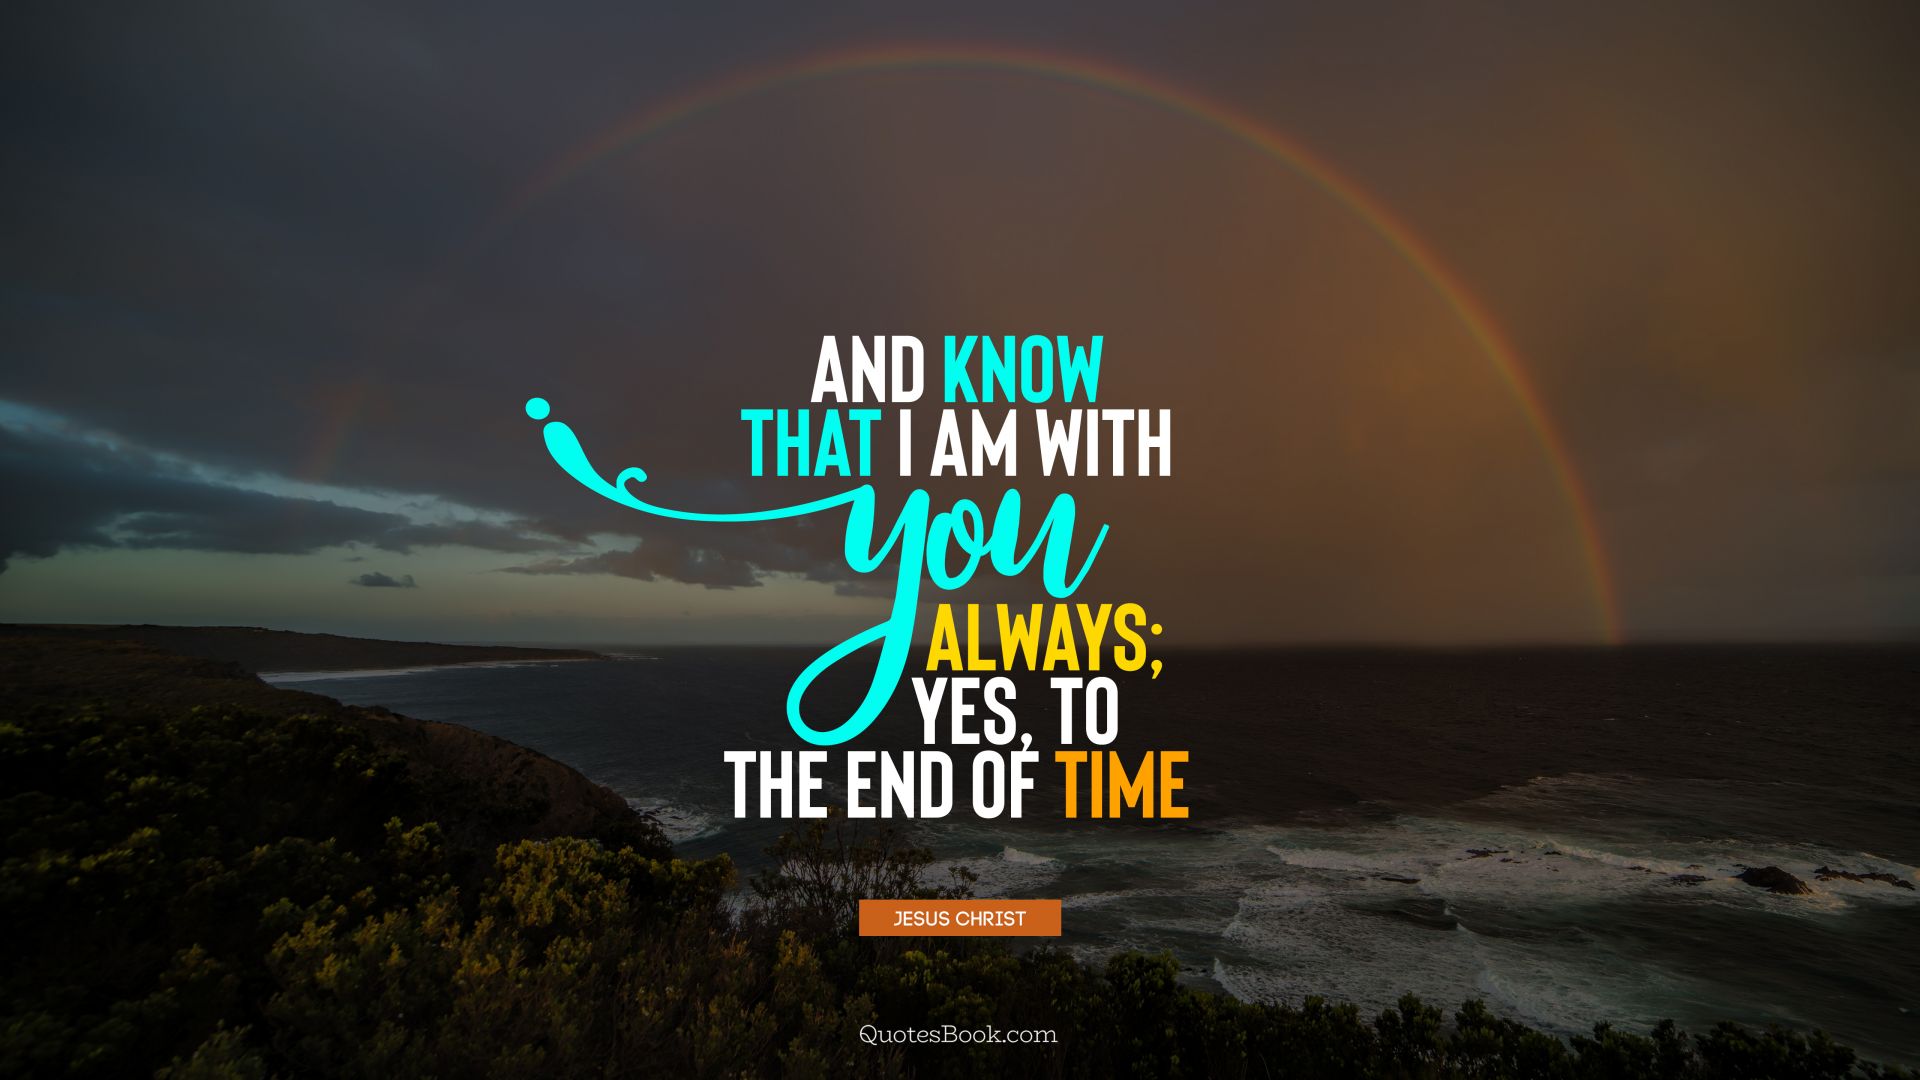 And know that I am with you always; yes, to the end of time. - Quote by Jesus Christ